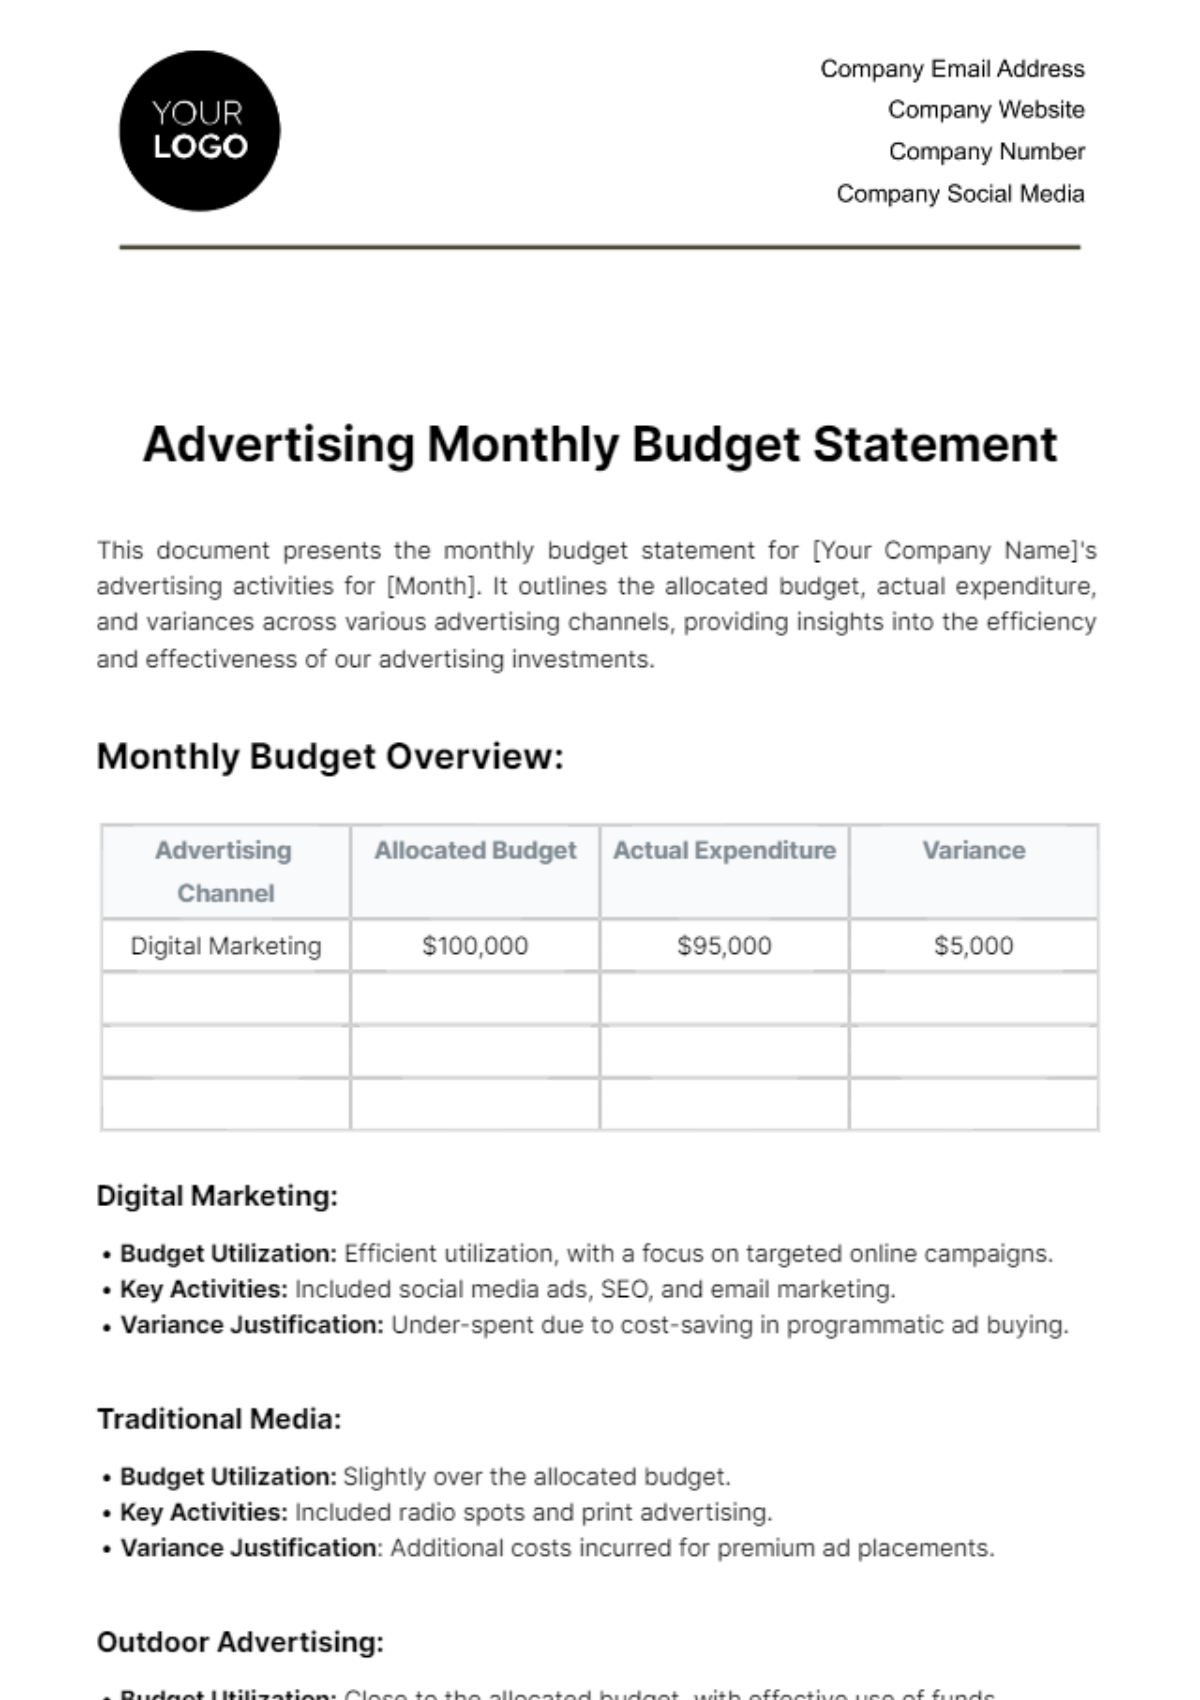 Free Advertising Monthly Budget Statement Template